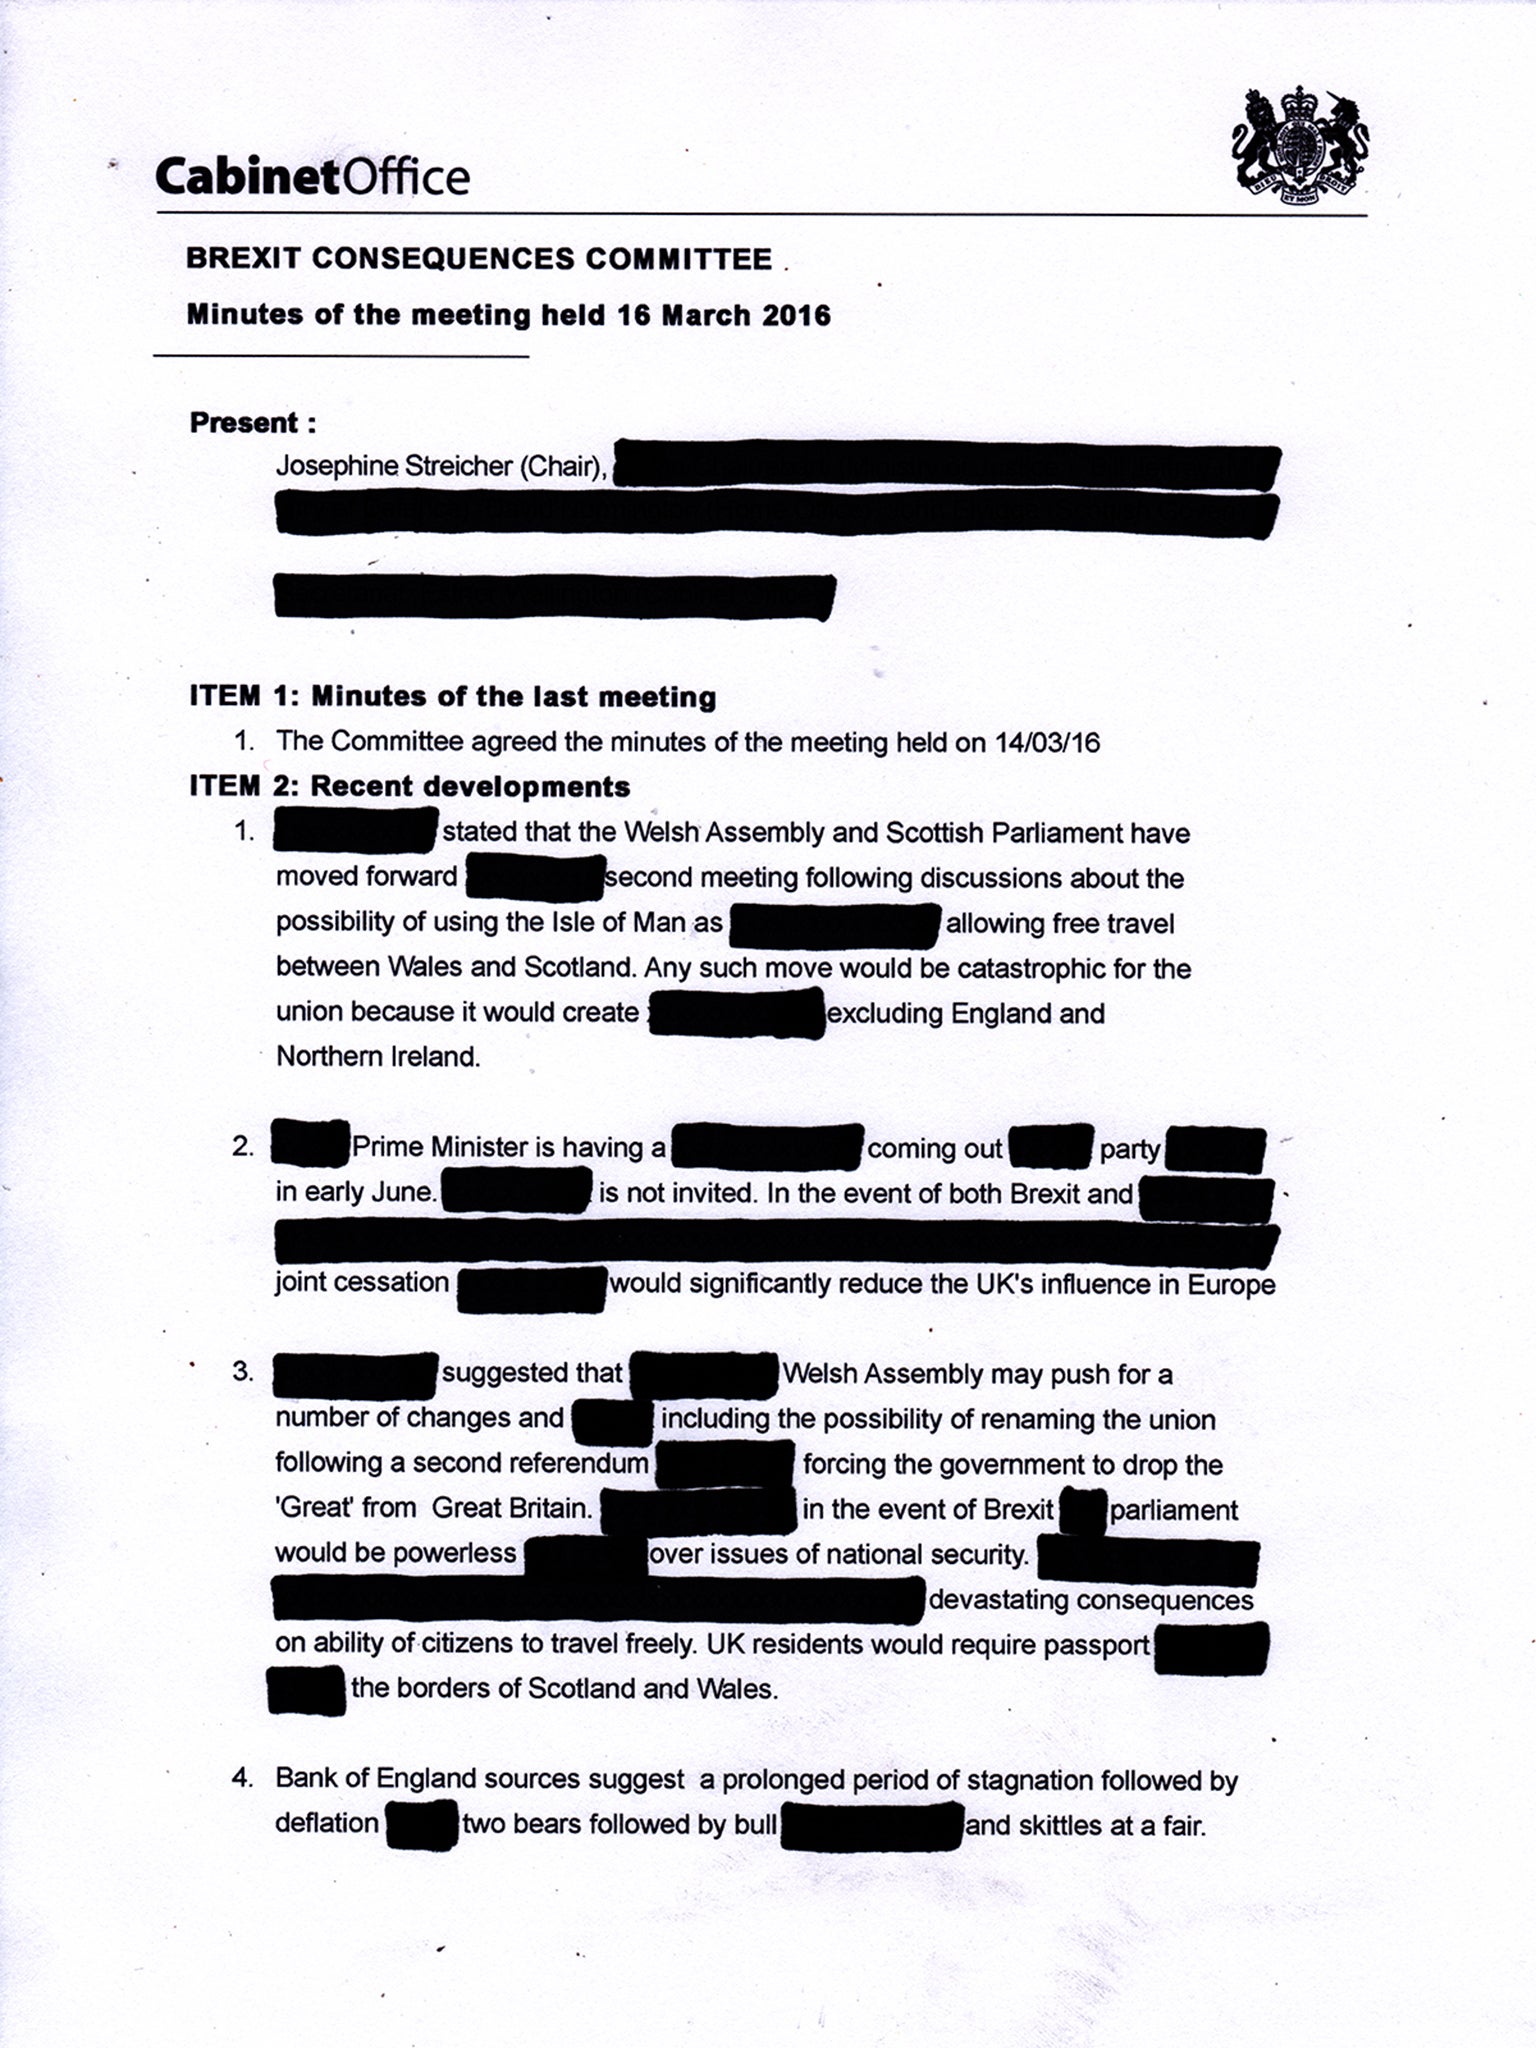 The files handed to the Independent include redacted minutes, emails and other materials